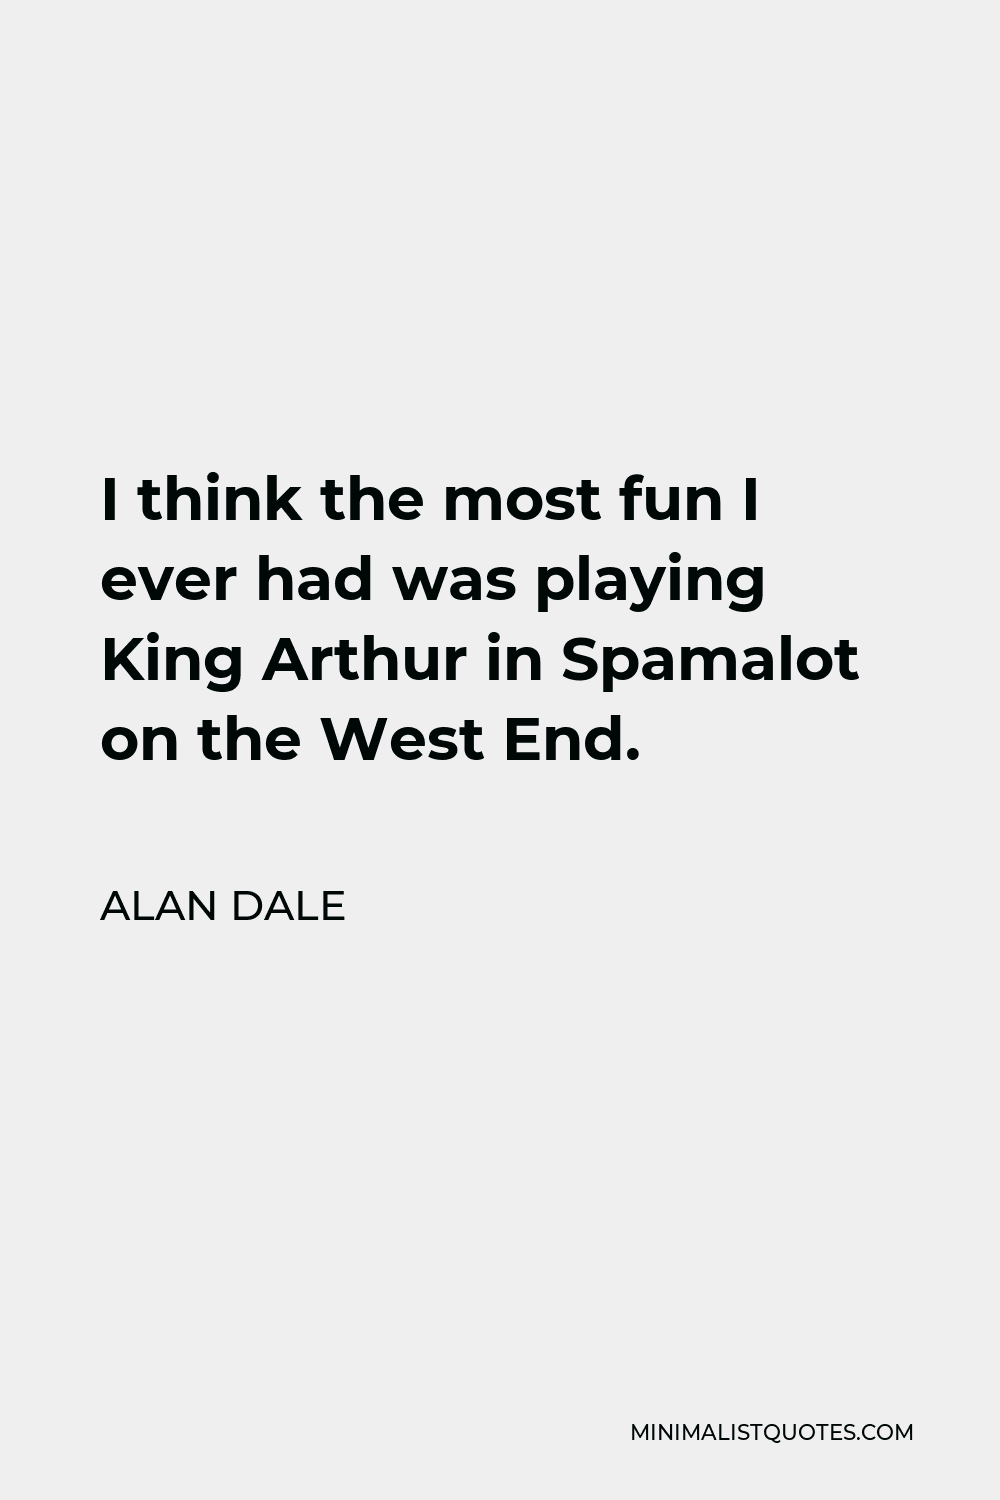 Alan Dale Quote - I think the most fun I ever had was playing King Arthur in Spamalot on the West End.